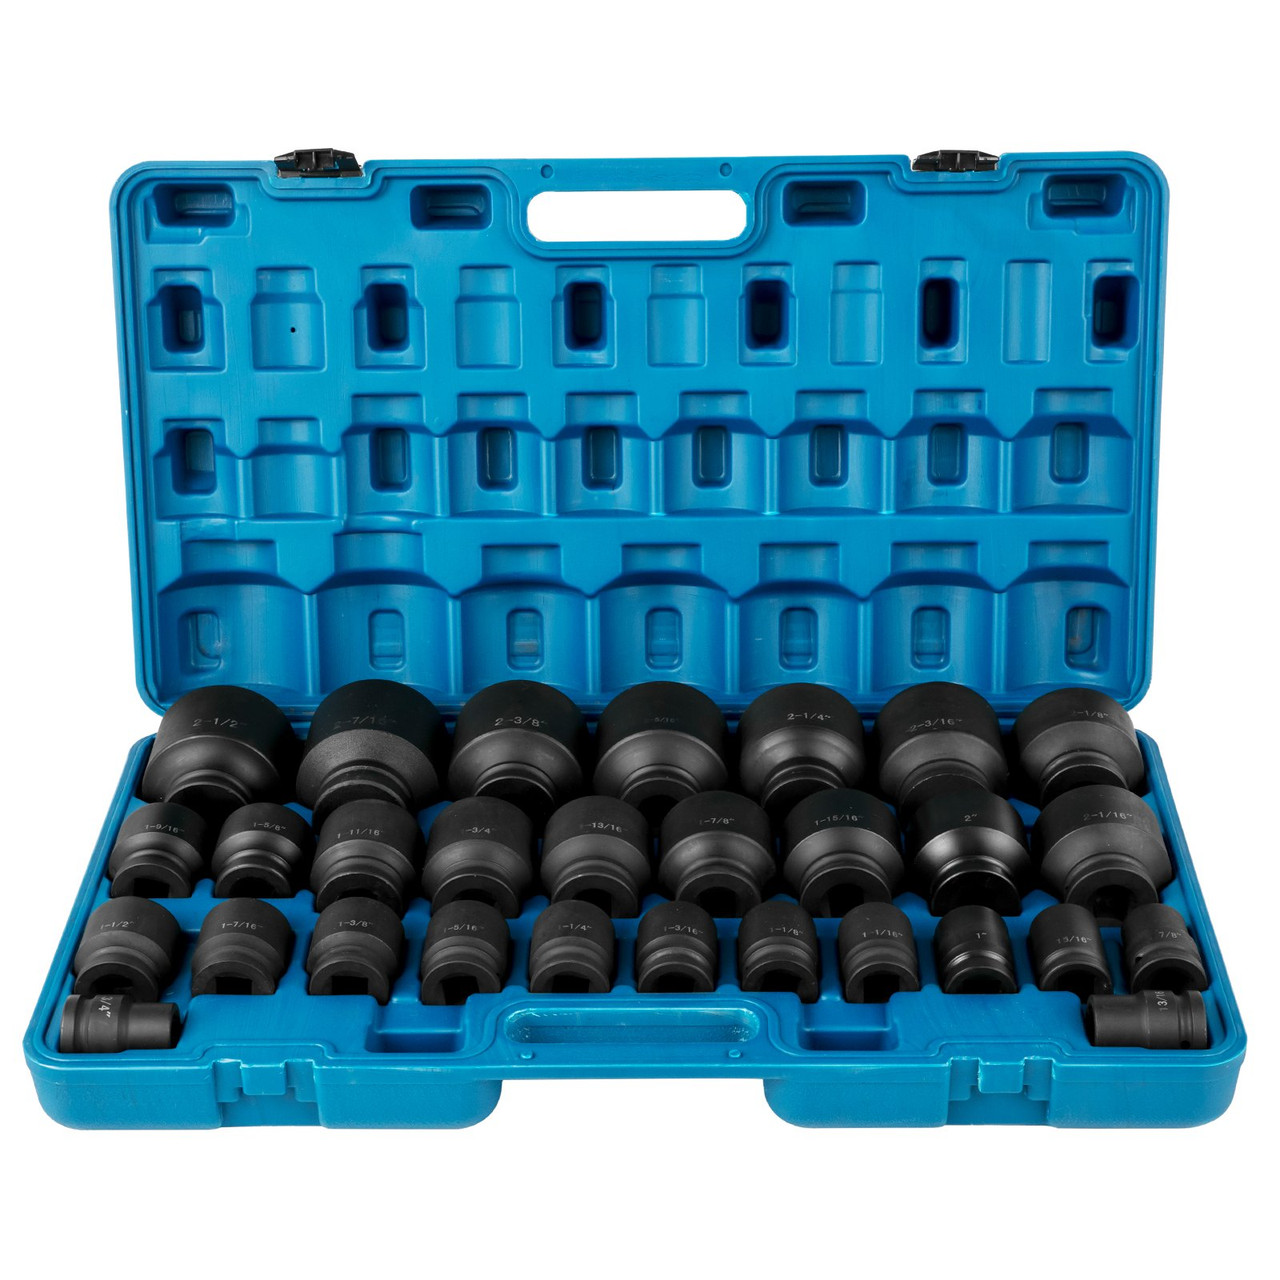 Impact Socket Set 3/4 Inches 29 Piece Impact Sockets, 6-Point Sockets, Rugged Construction, CR-M0, 3/4 Inches Drive Socket Set Impact SAE 3/4 inch - 2-1/2 inch, with a Storage Cage